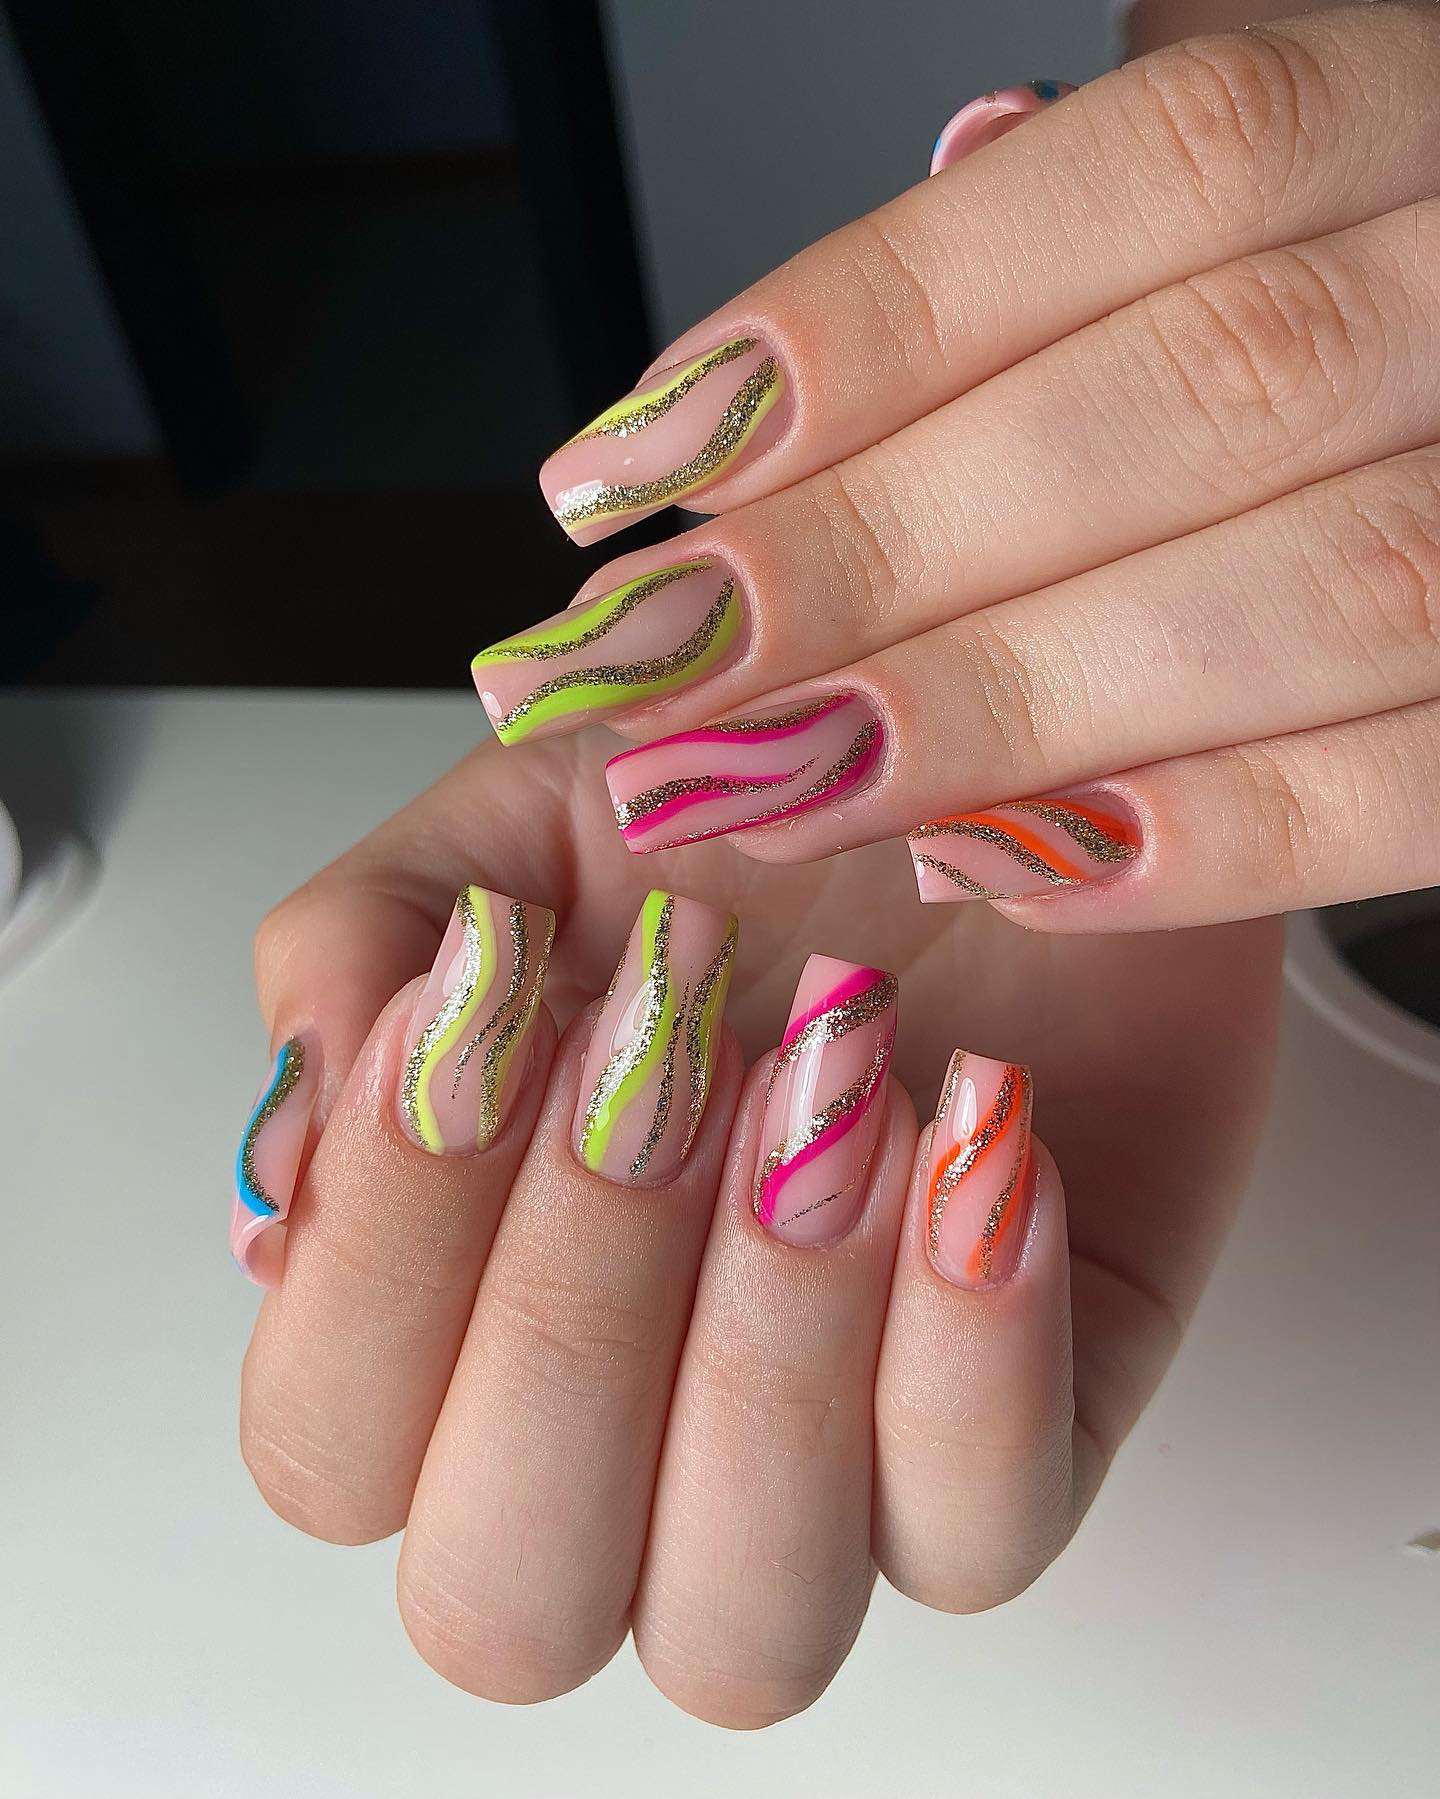 100+ Must Try Fall Nail Art Designs And Nail Ideas images 73